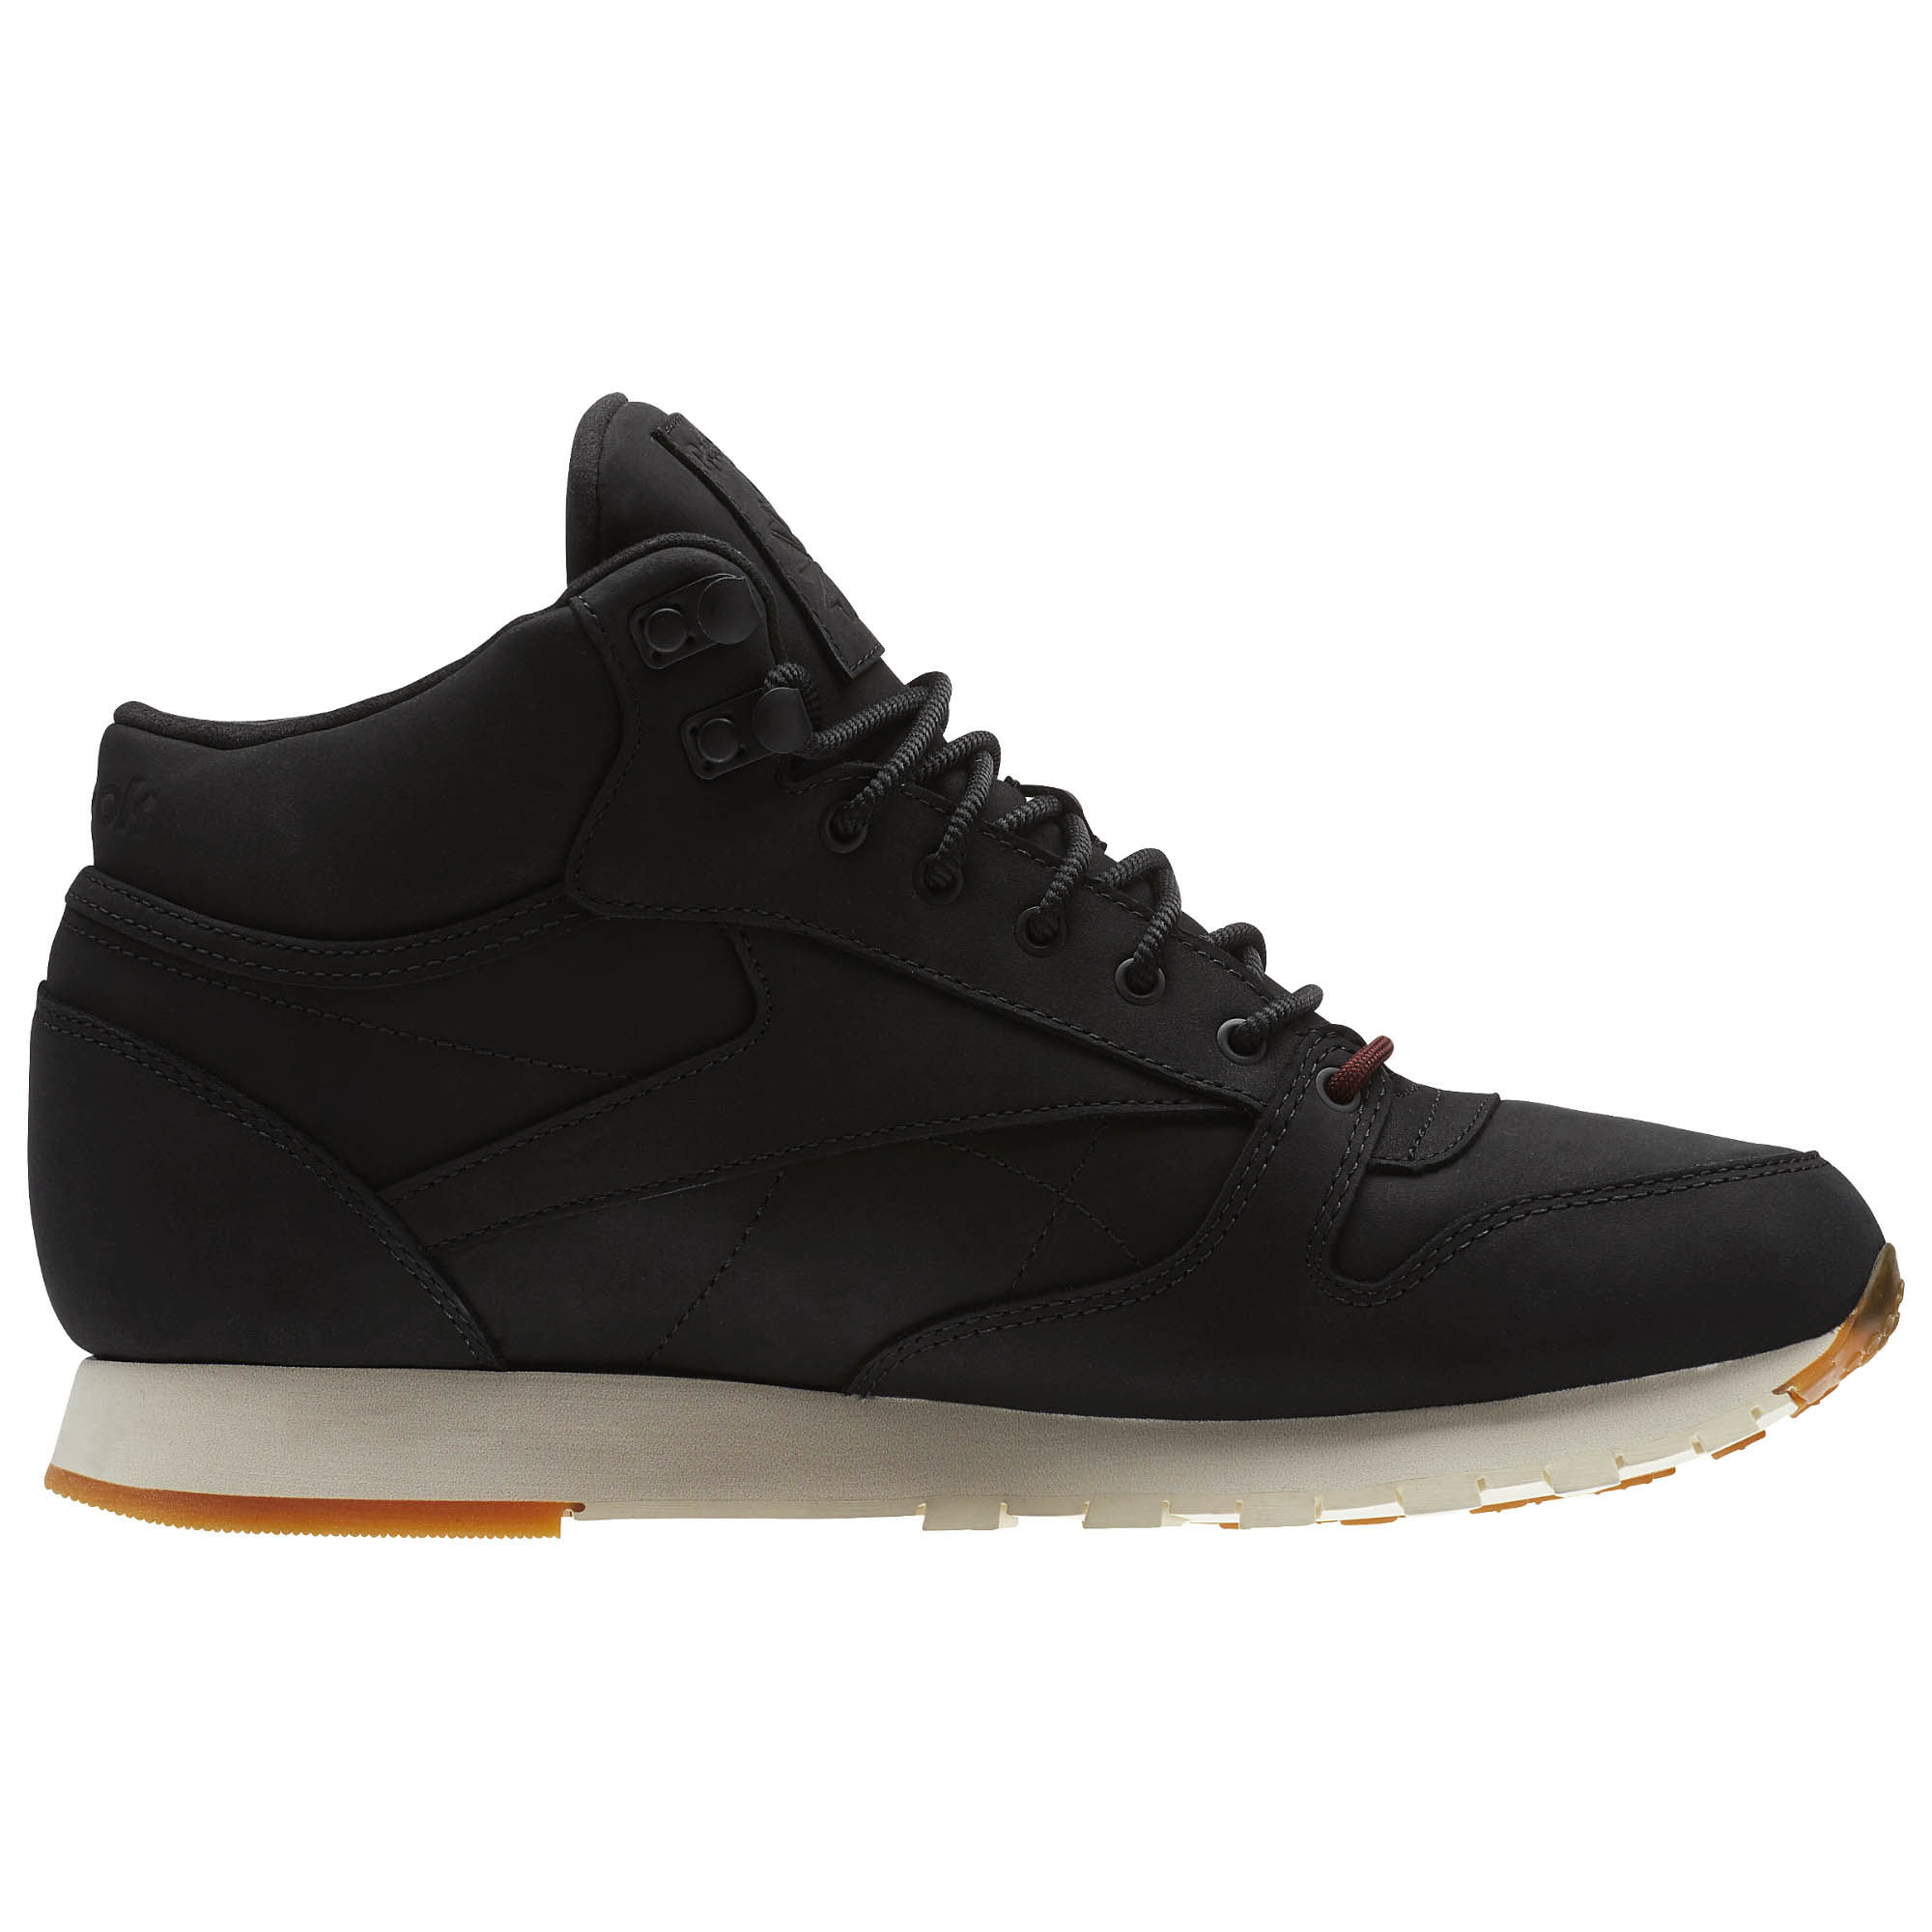 reebok classic leather mid gore-tex thinsulate black 3